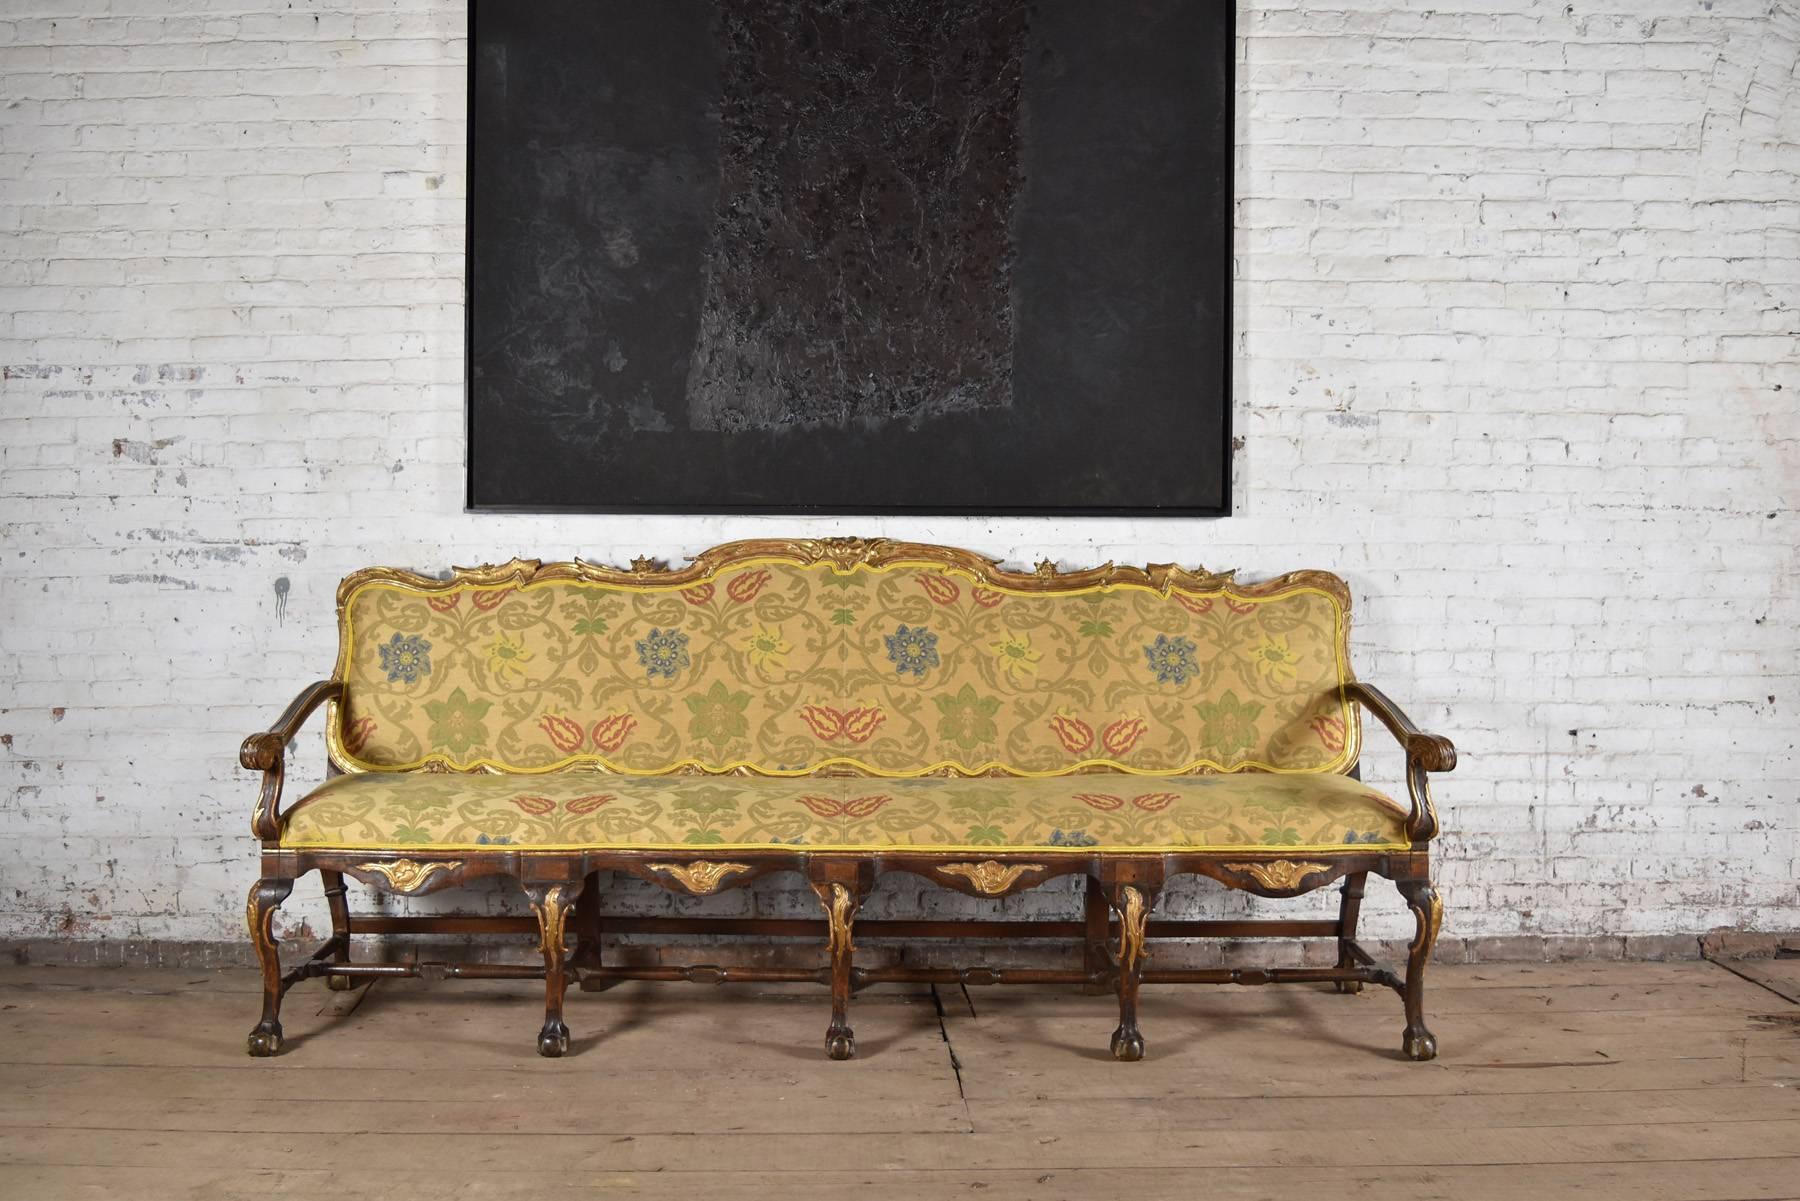 Rococo Long 18th Century Carved and Parcel-Gilt Spanish / Portuguese Settee For Sale